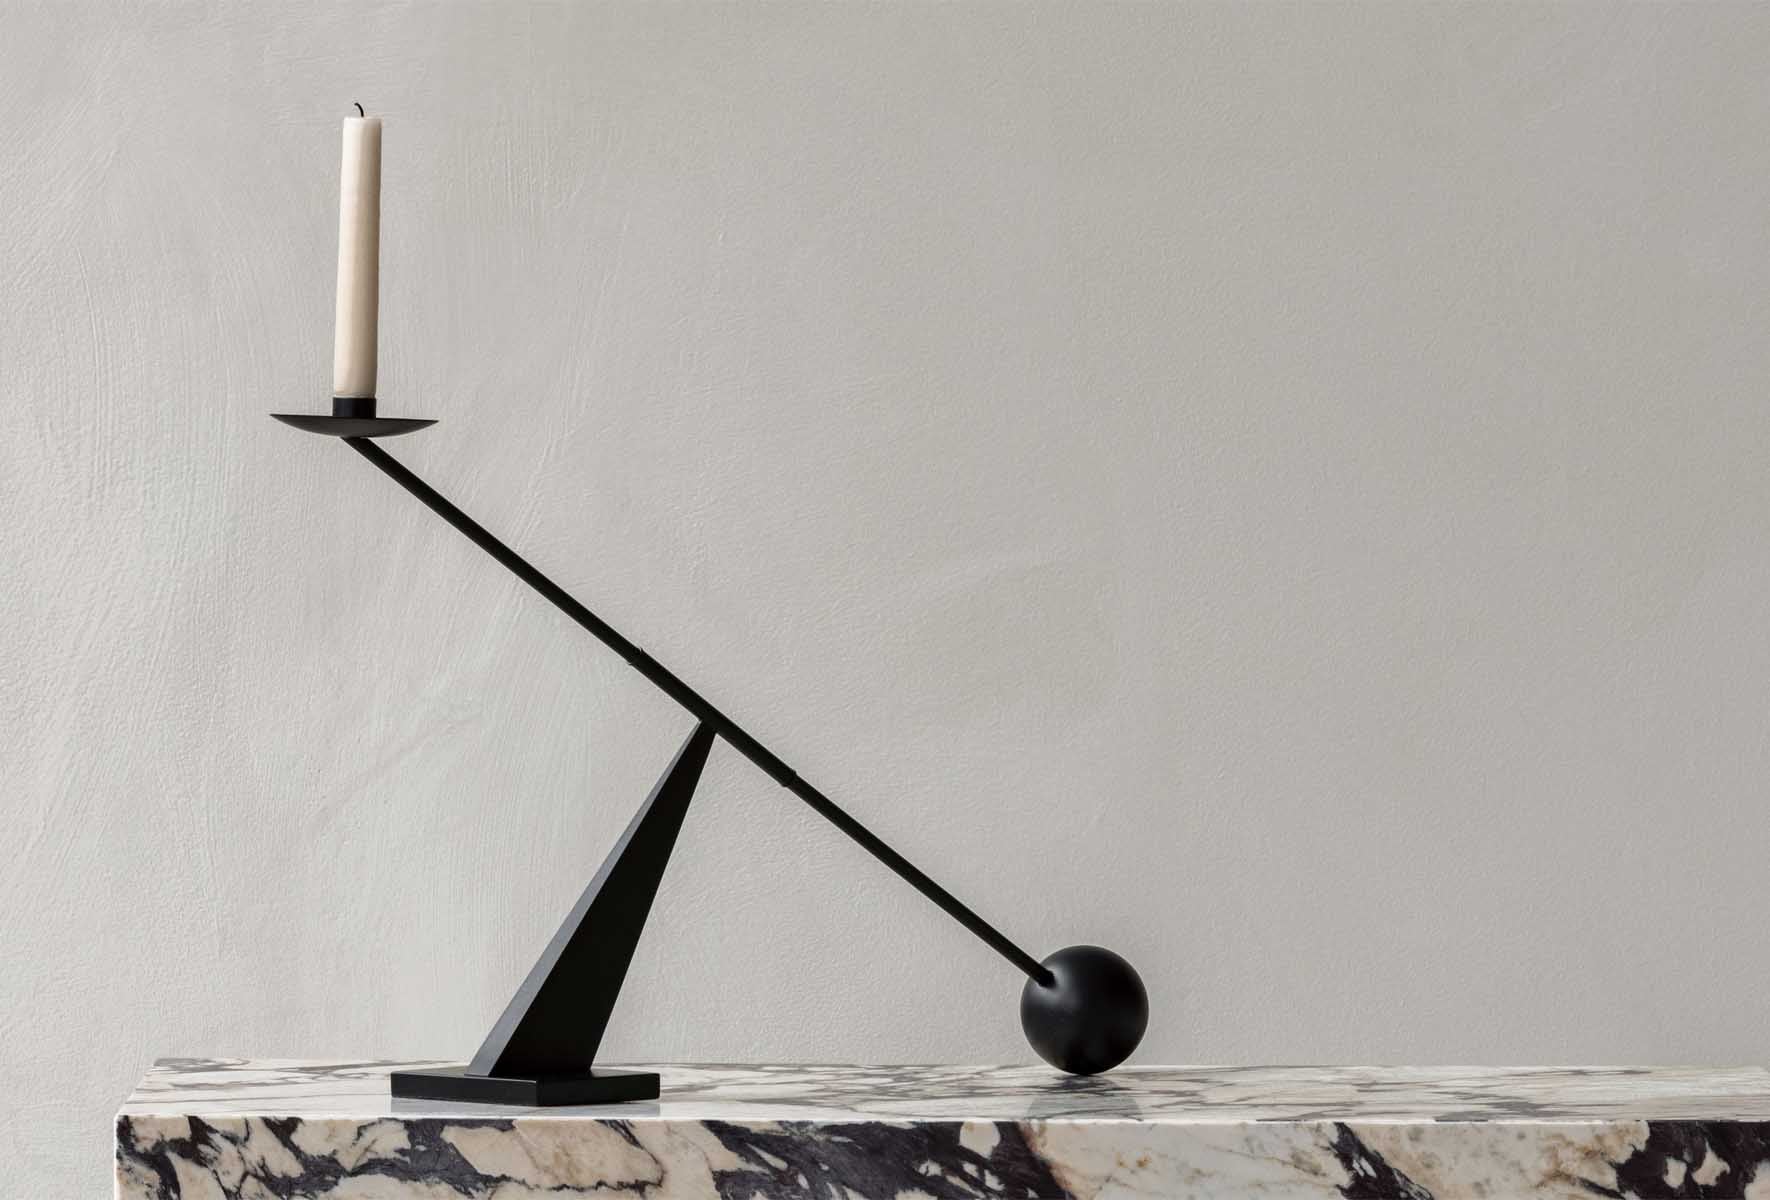 Audo | Interconnect Candle Holder